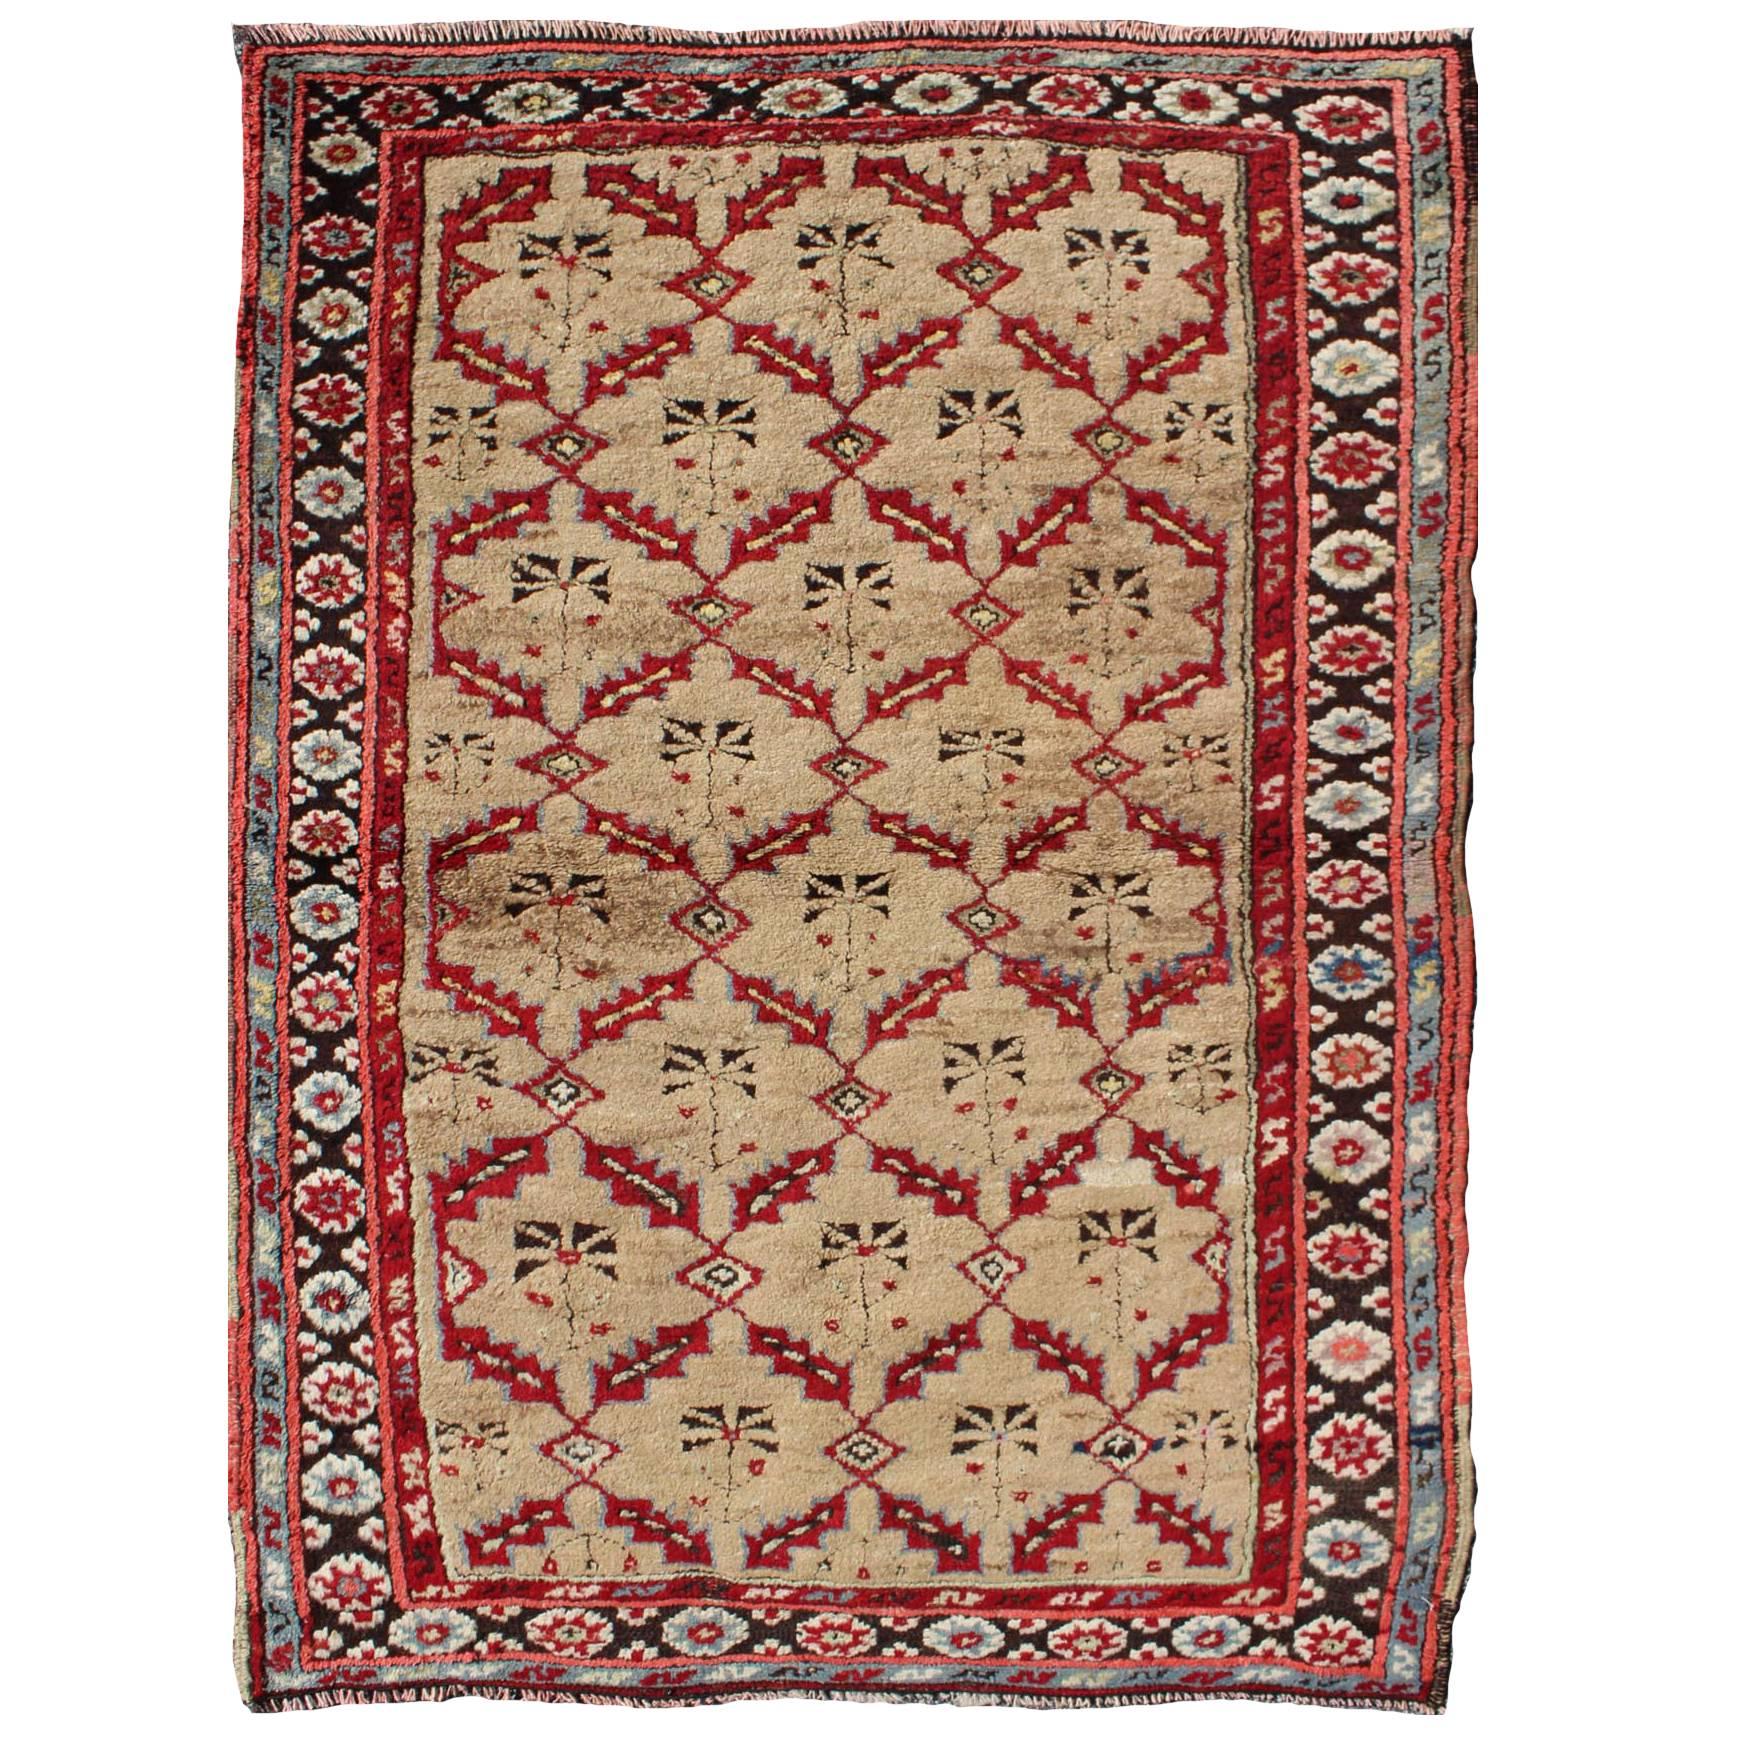 Antique 1930's Turkish Oushak Rug with All-Over Lattice & Geometric Design For Sale